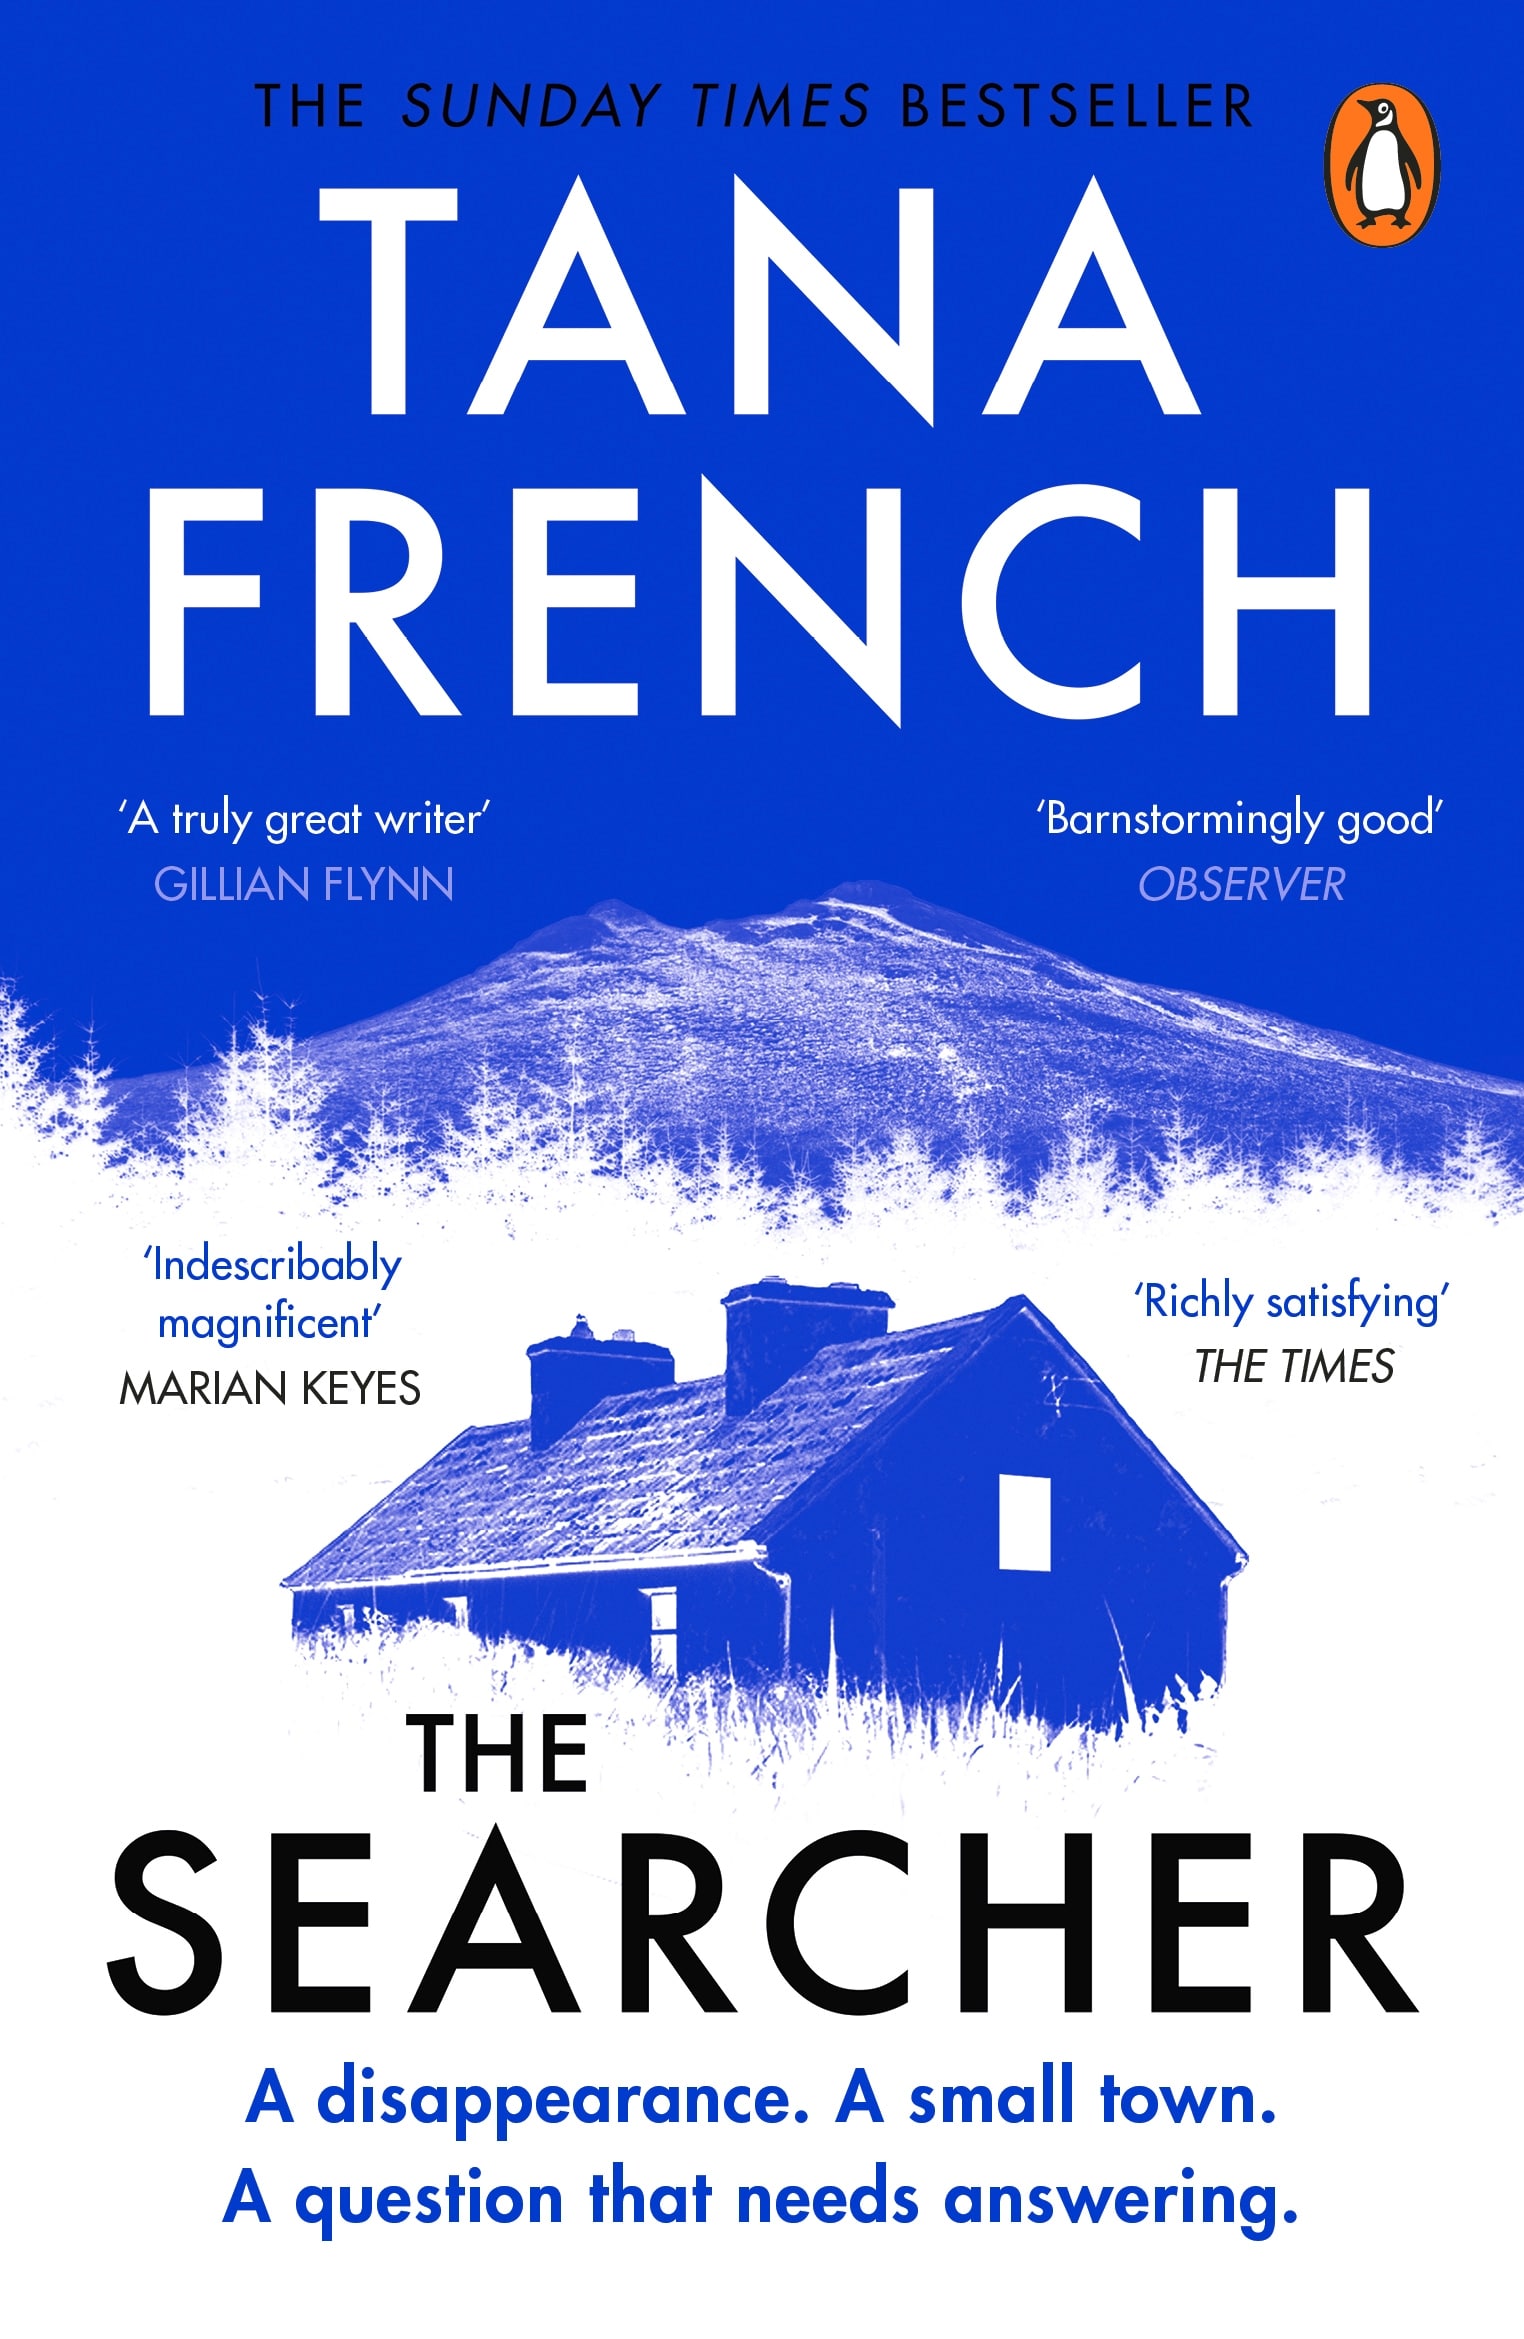 Book cover of The Searcher by Tana French